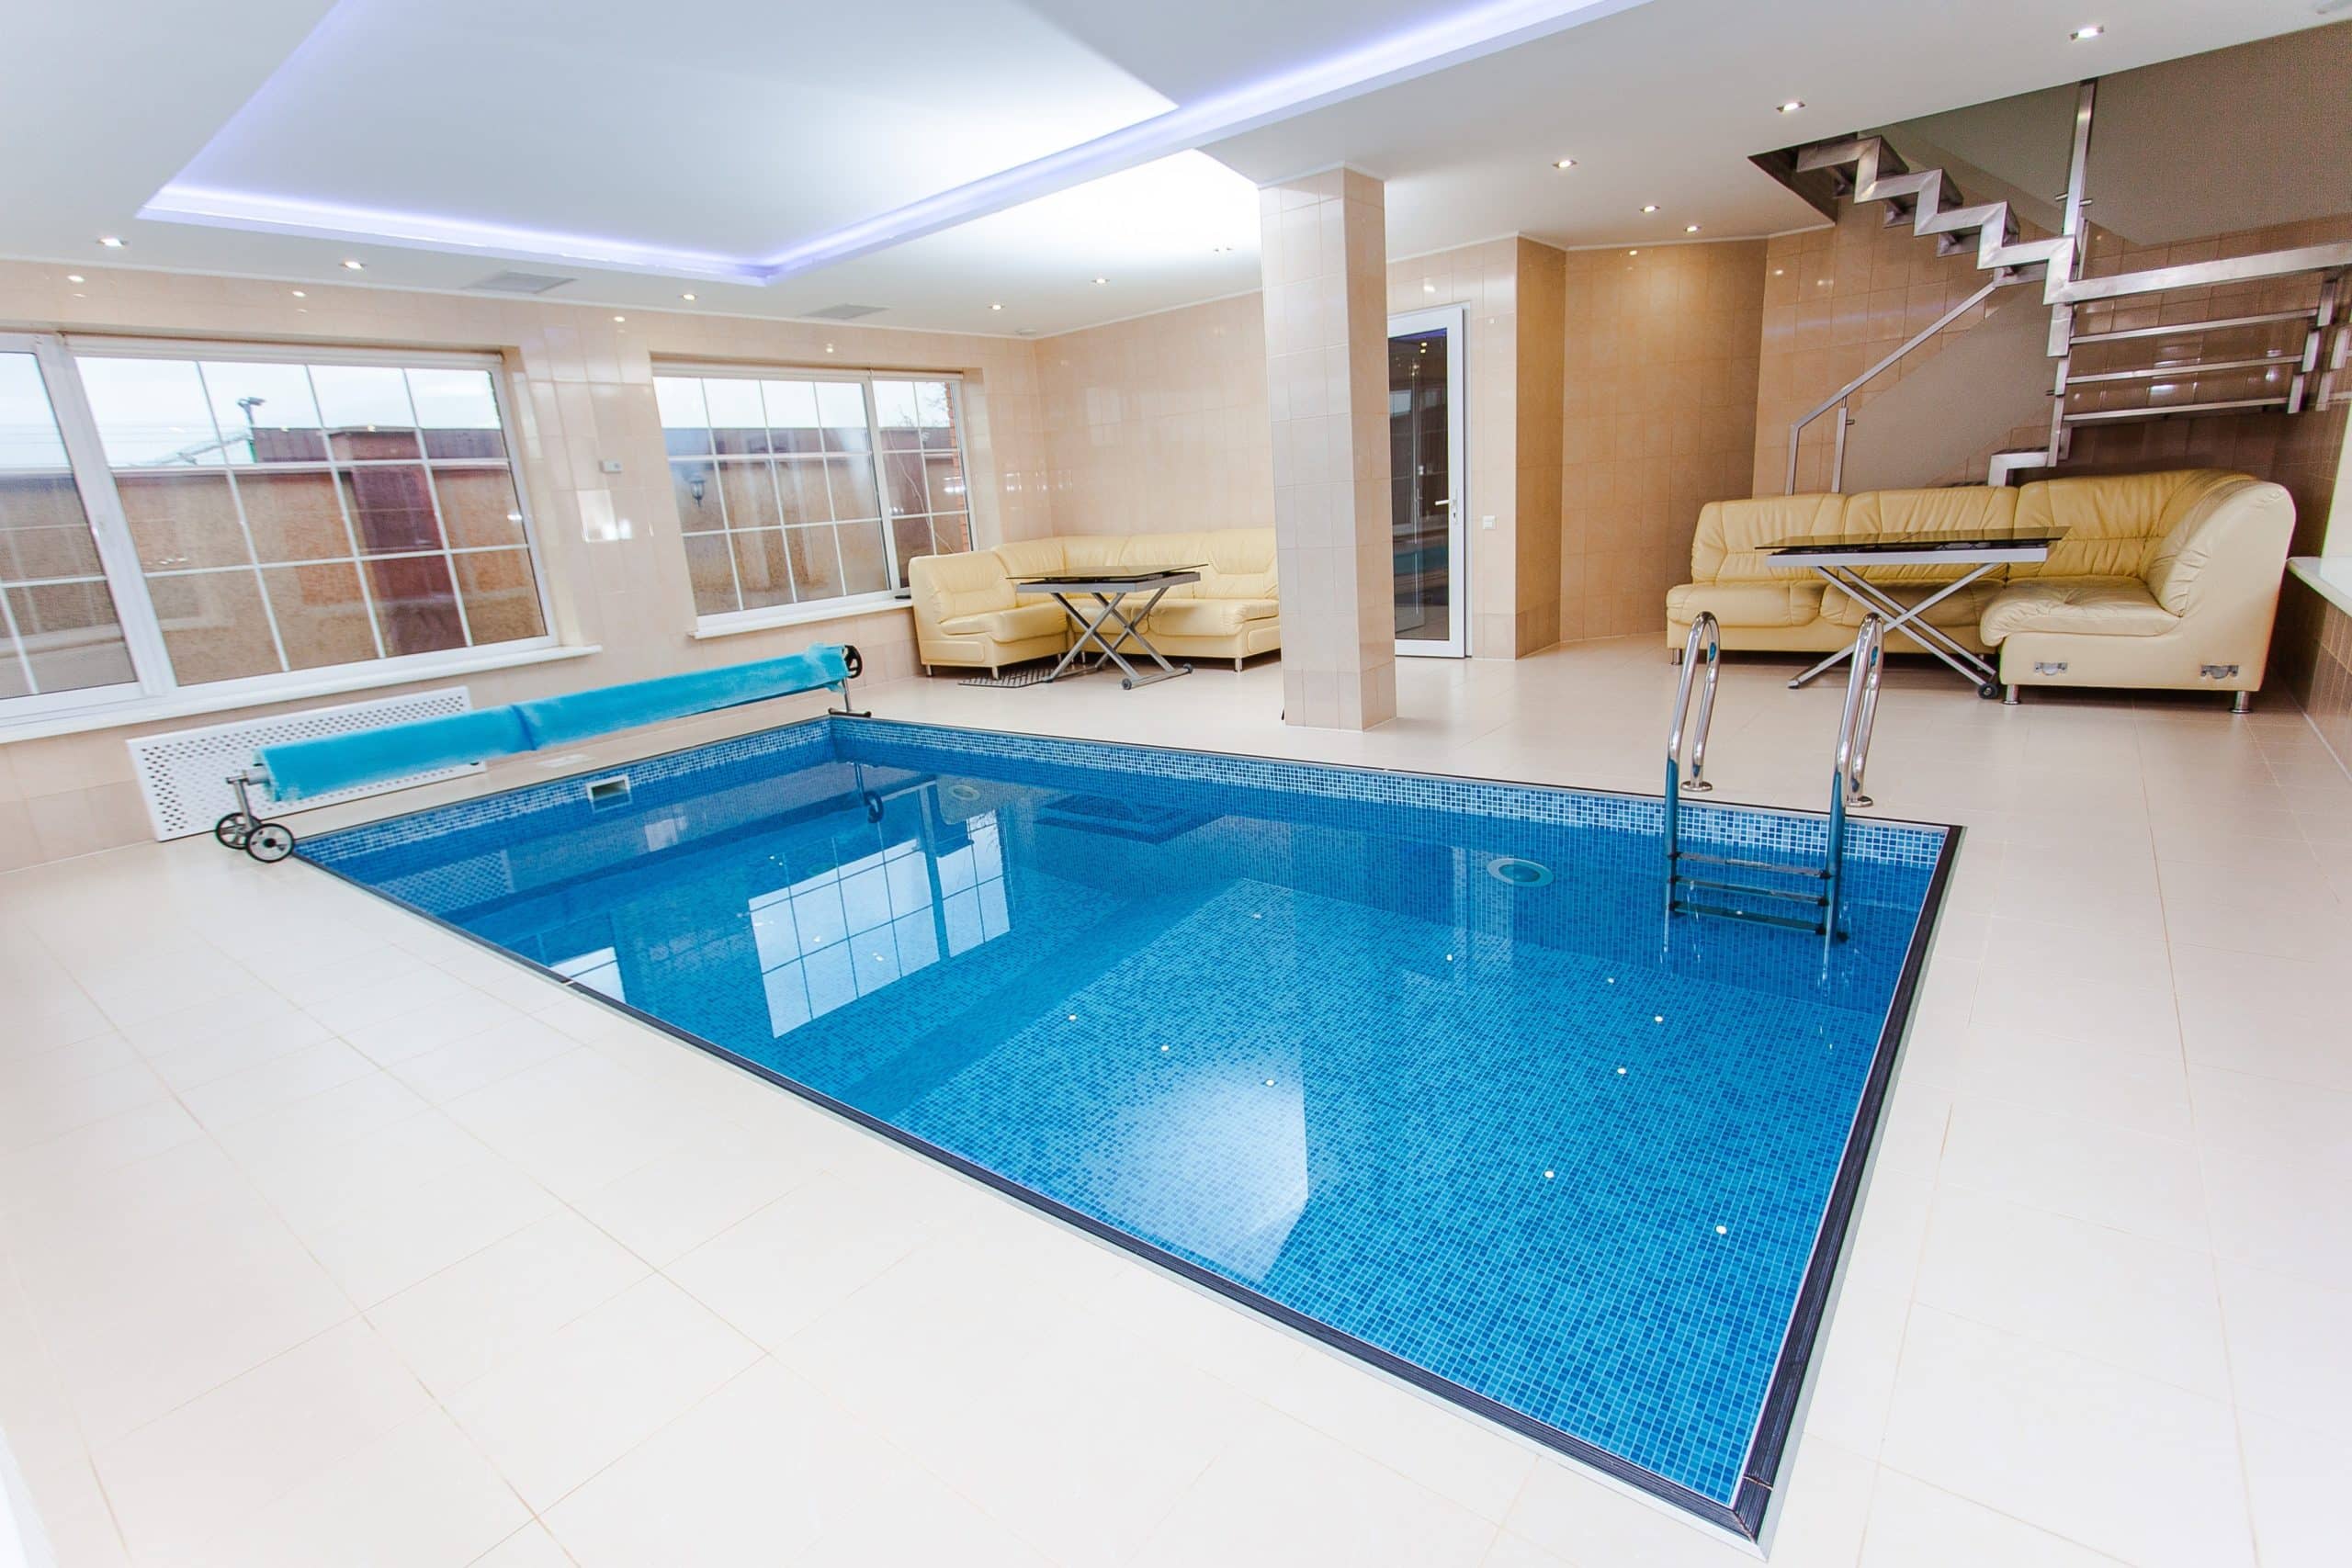 Complete Swimming Pool Remodels